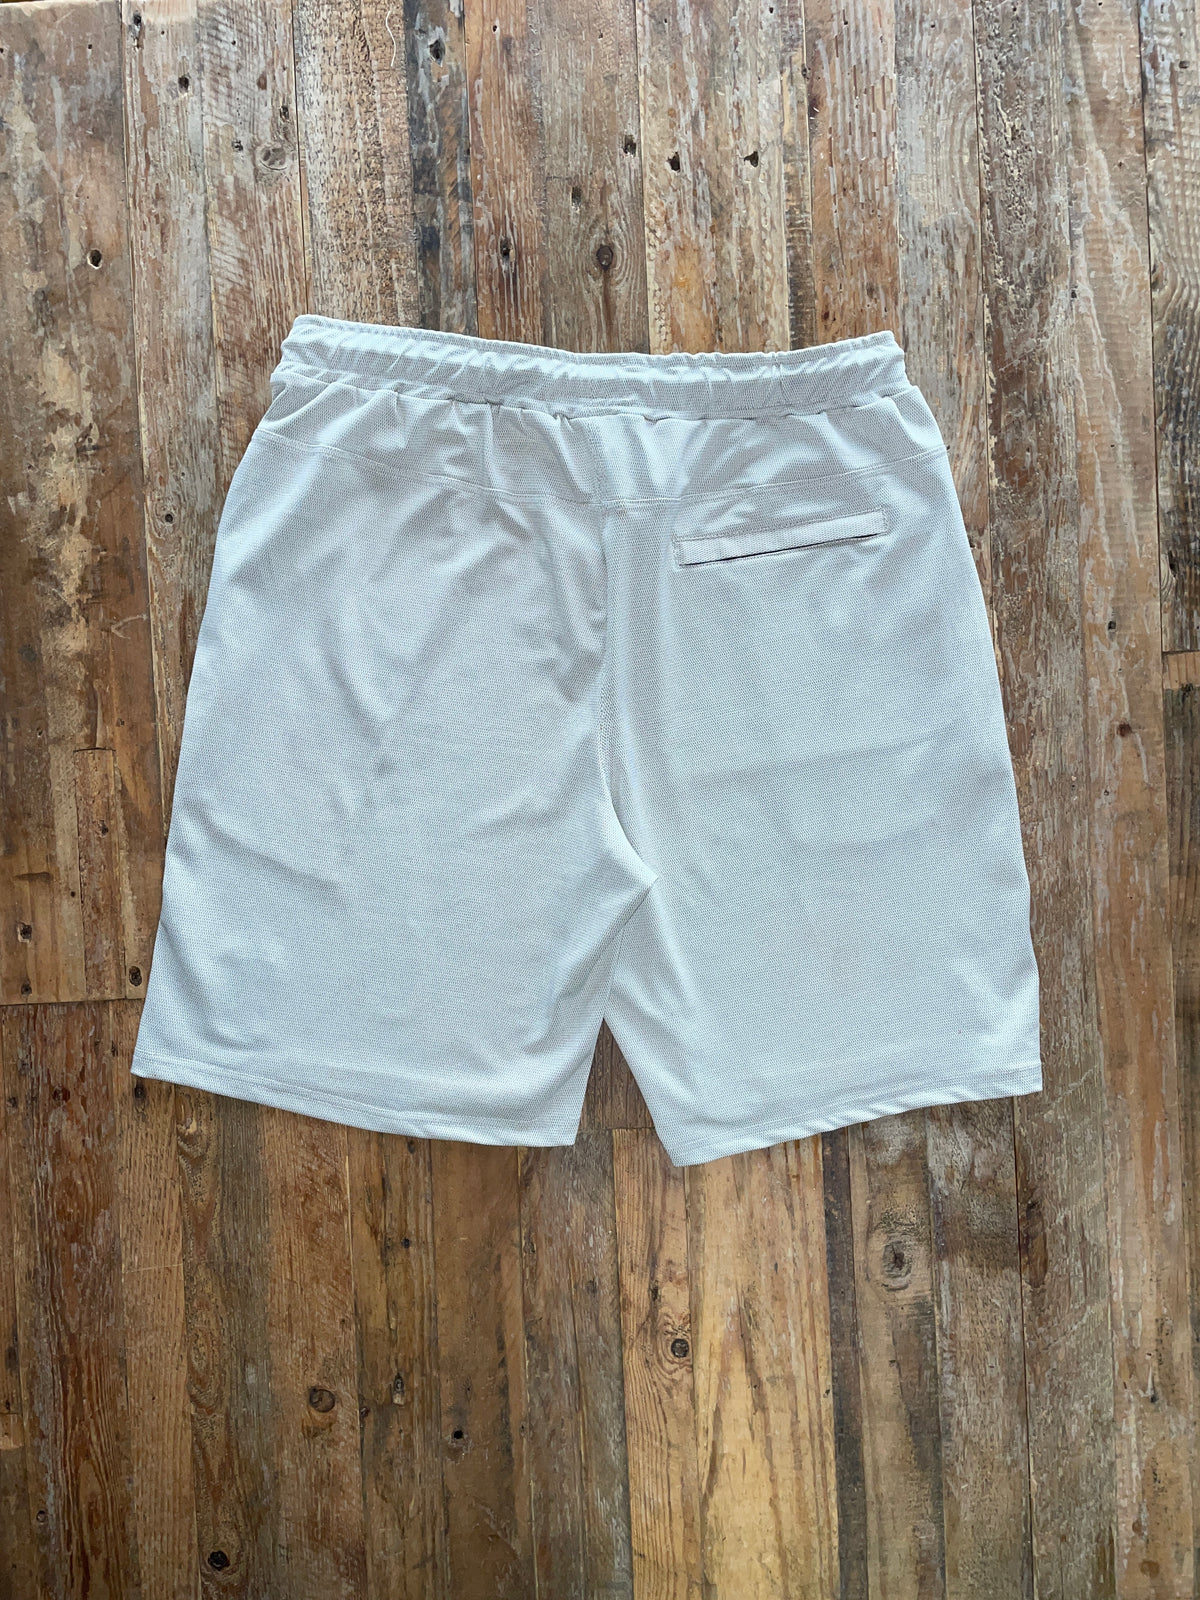 HYSB -  GAME OVER HYDRO COOL SHORT